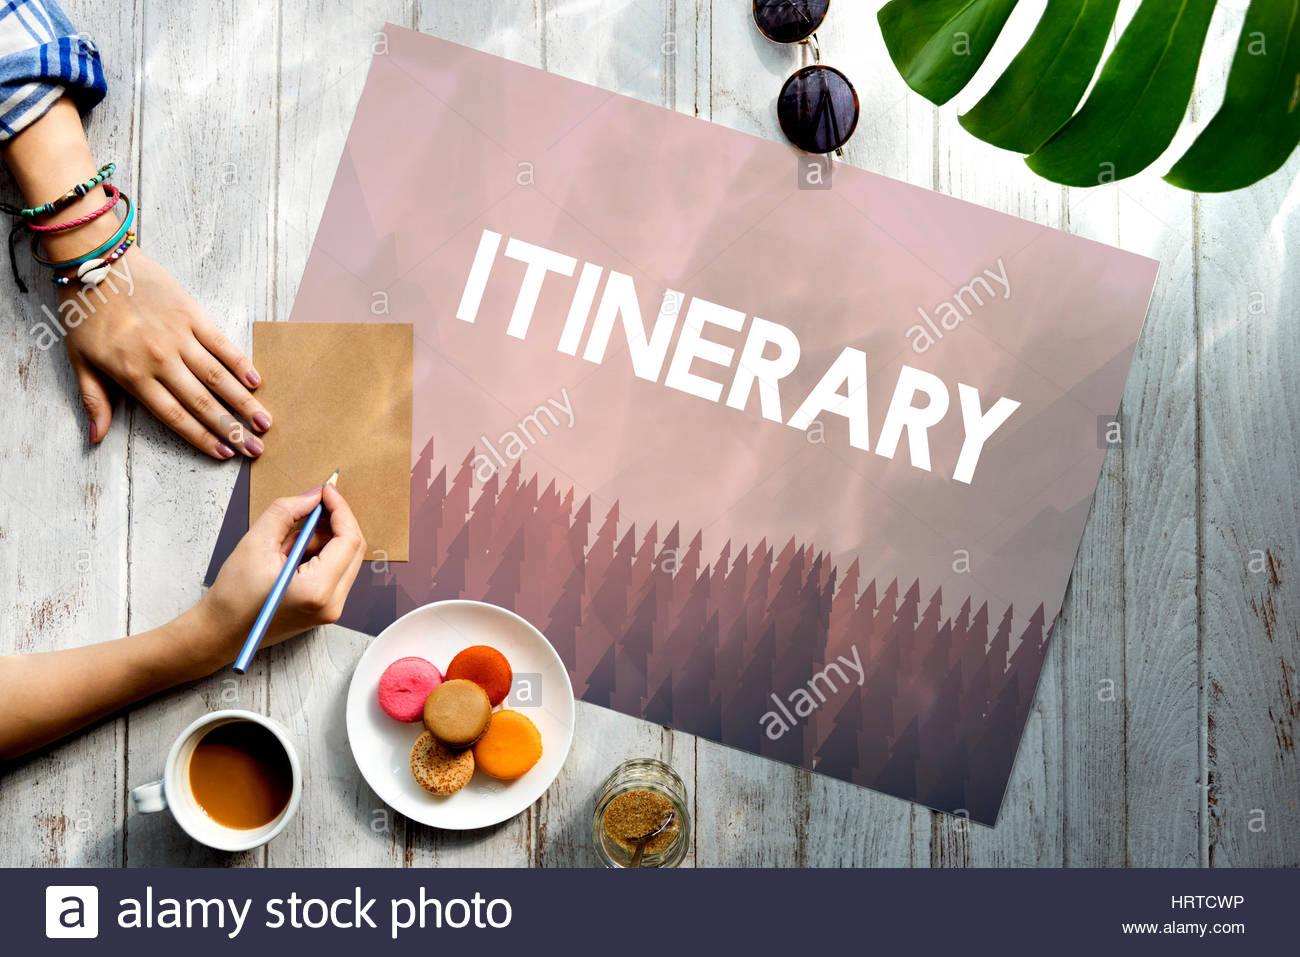 Itinerary Word On Nature Background With Trees Stock Photo